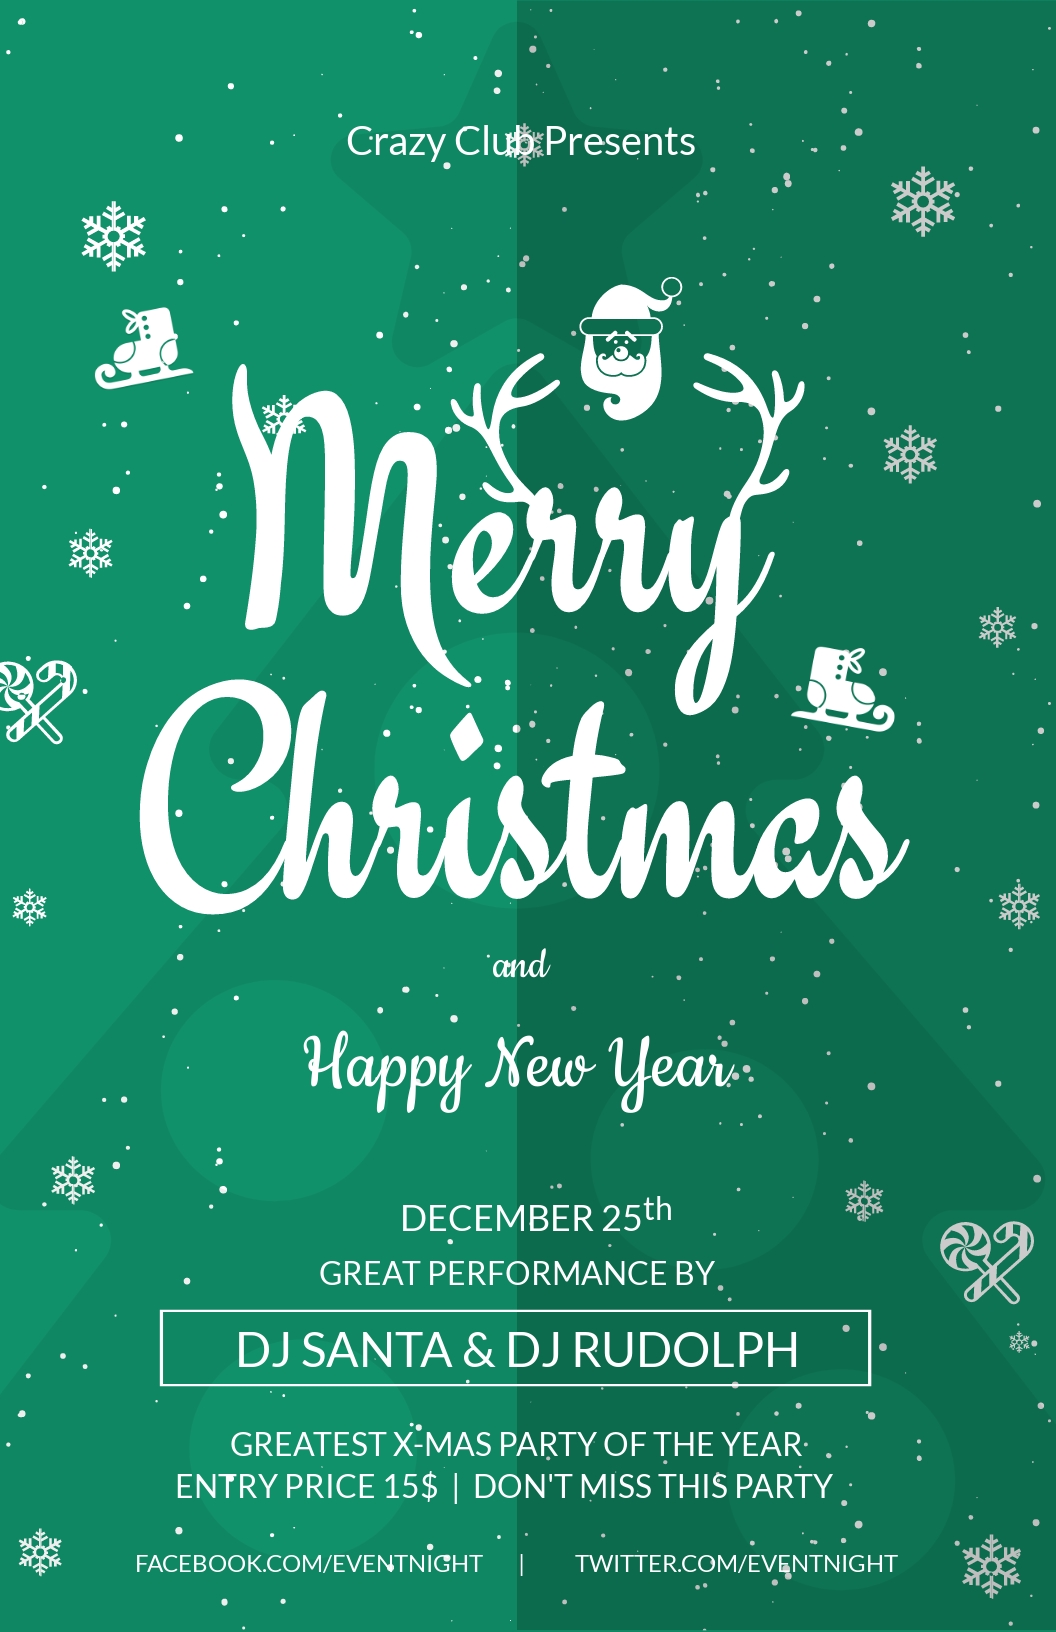 Free Chalkboard Christmas Party Poster Template - Apple Pages, PSD ...